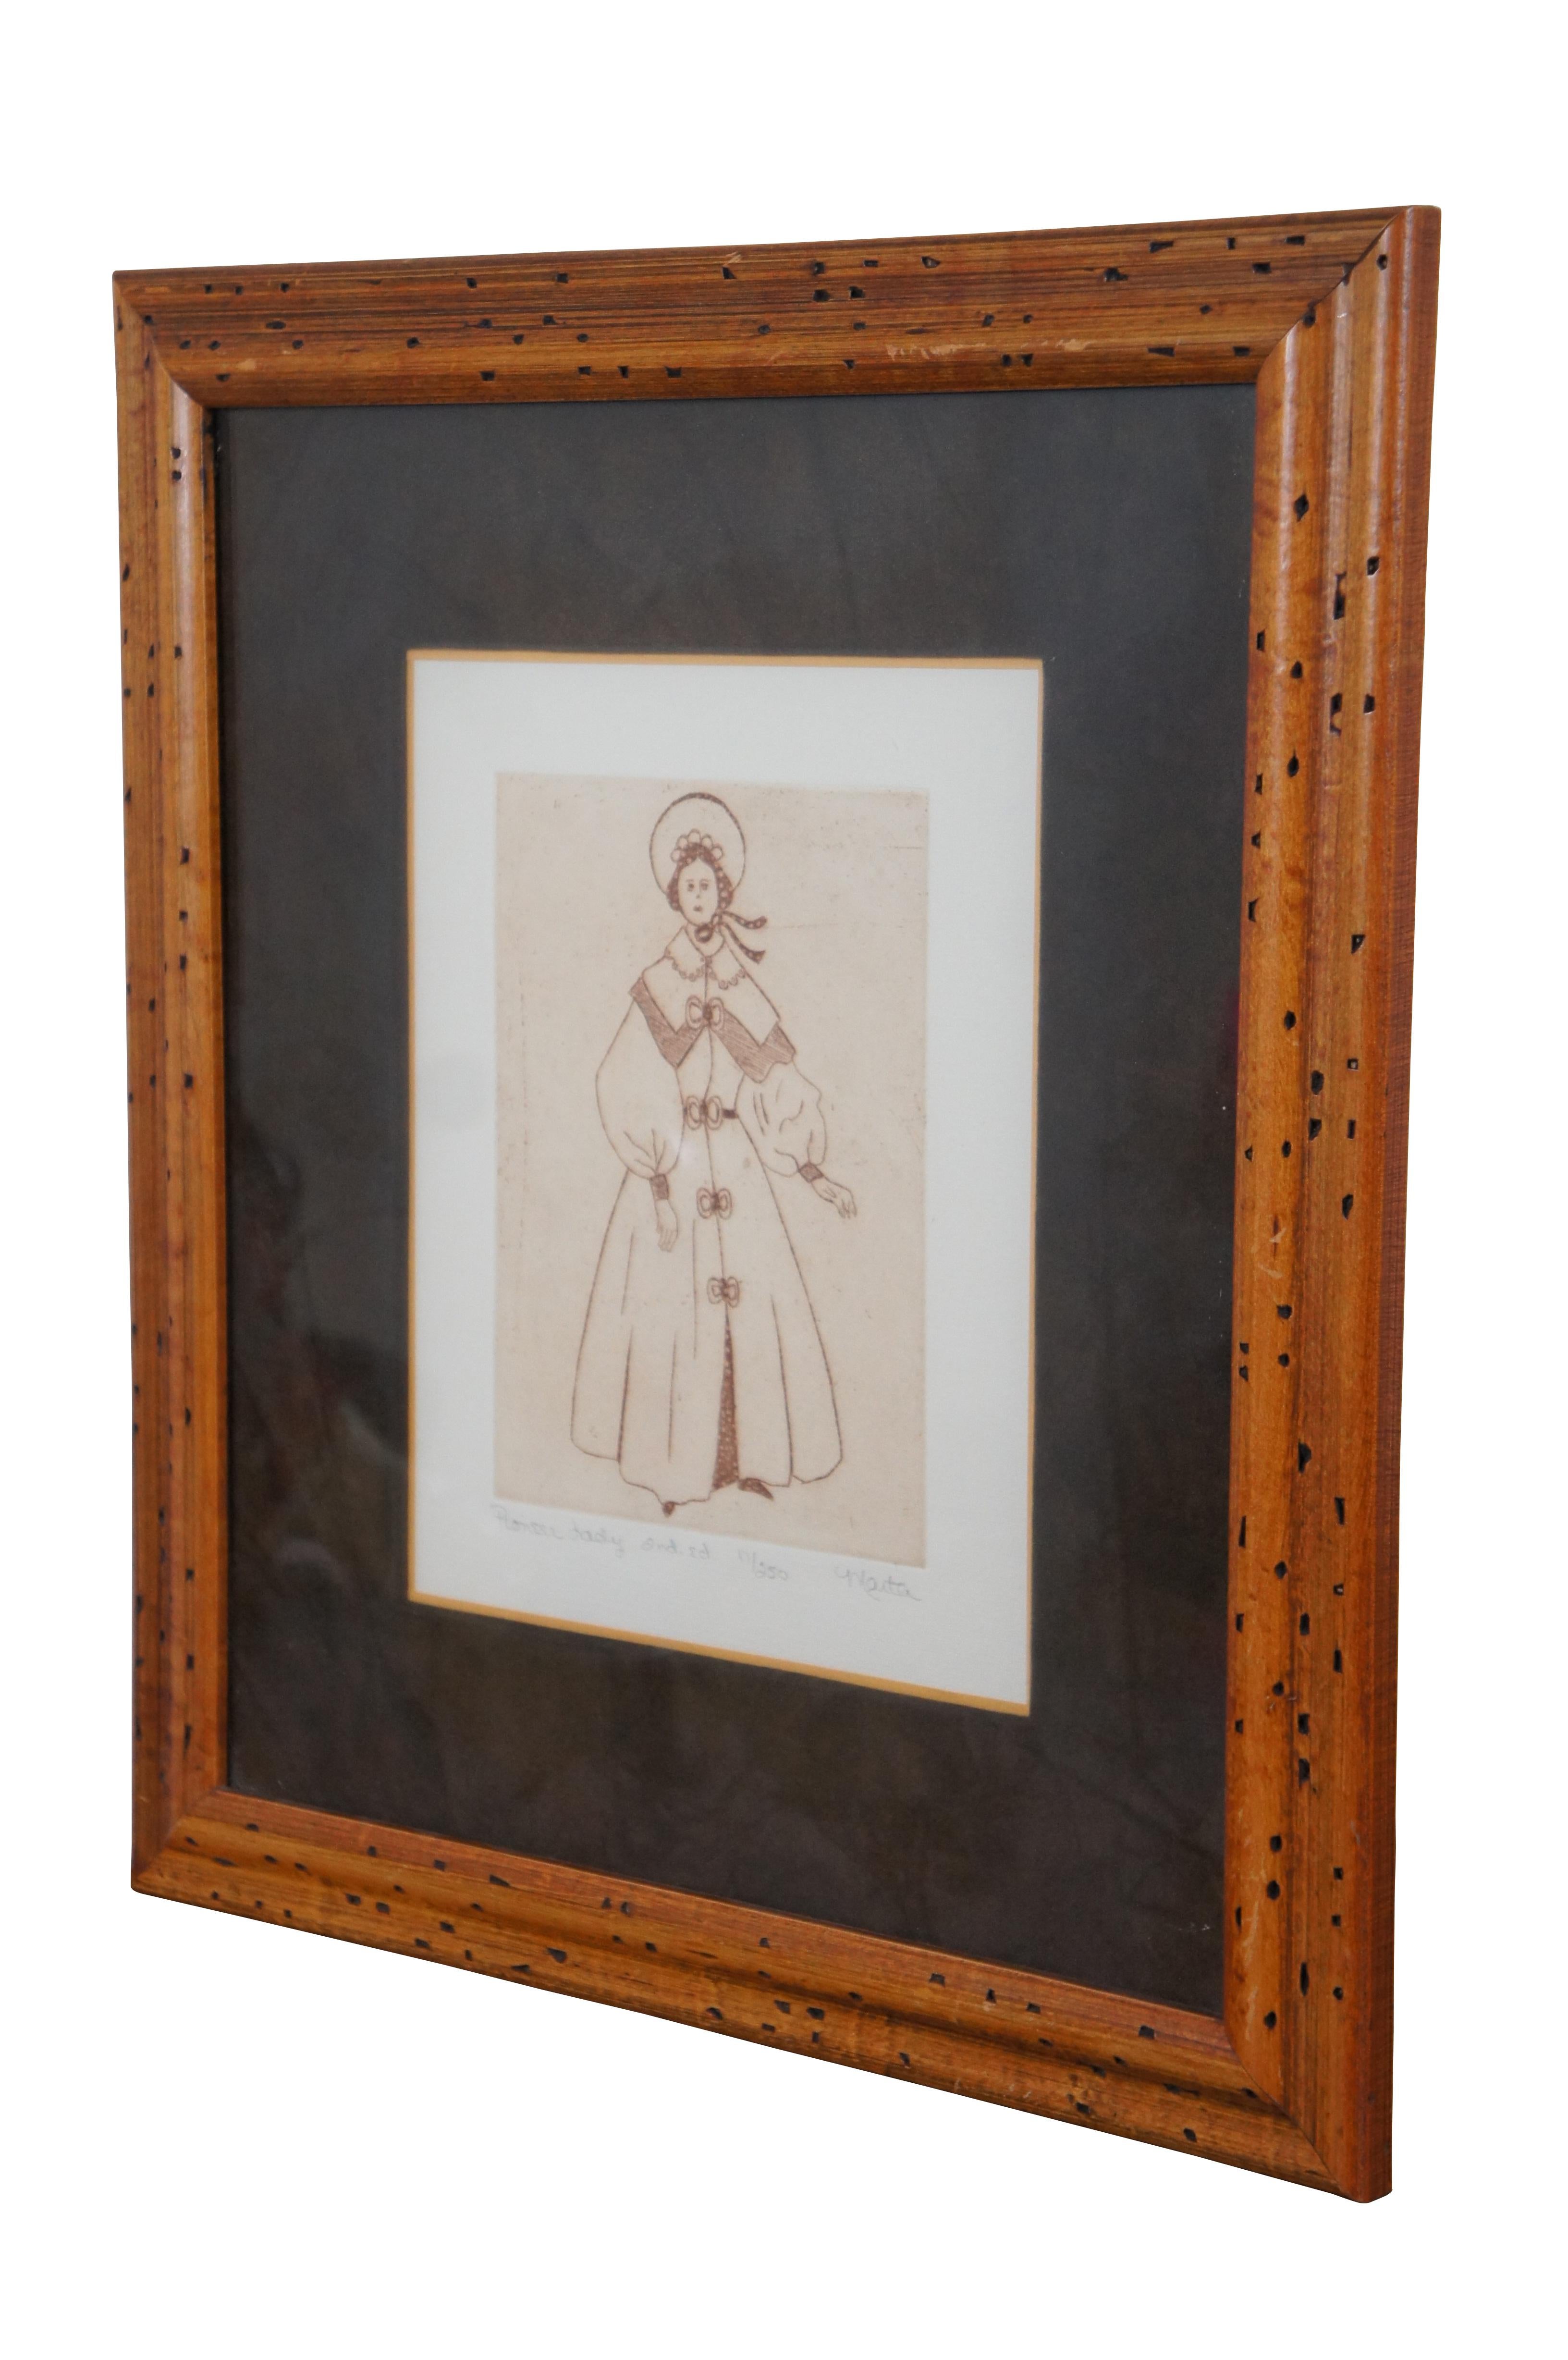 Vintage framed etching titled “Pioneer Lady” 2nd Edition, number 17/250, pencil signed Marta.

Measures: 16.5” x 0.75” x 18.5” / Sans Frame - 8” x 10” (Width x Depth x Height).